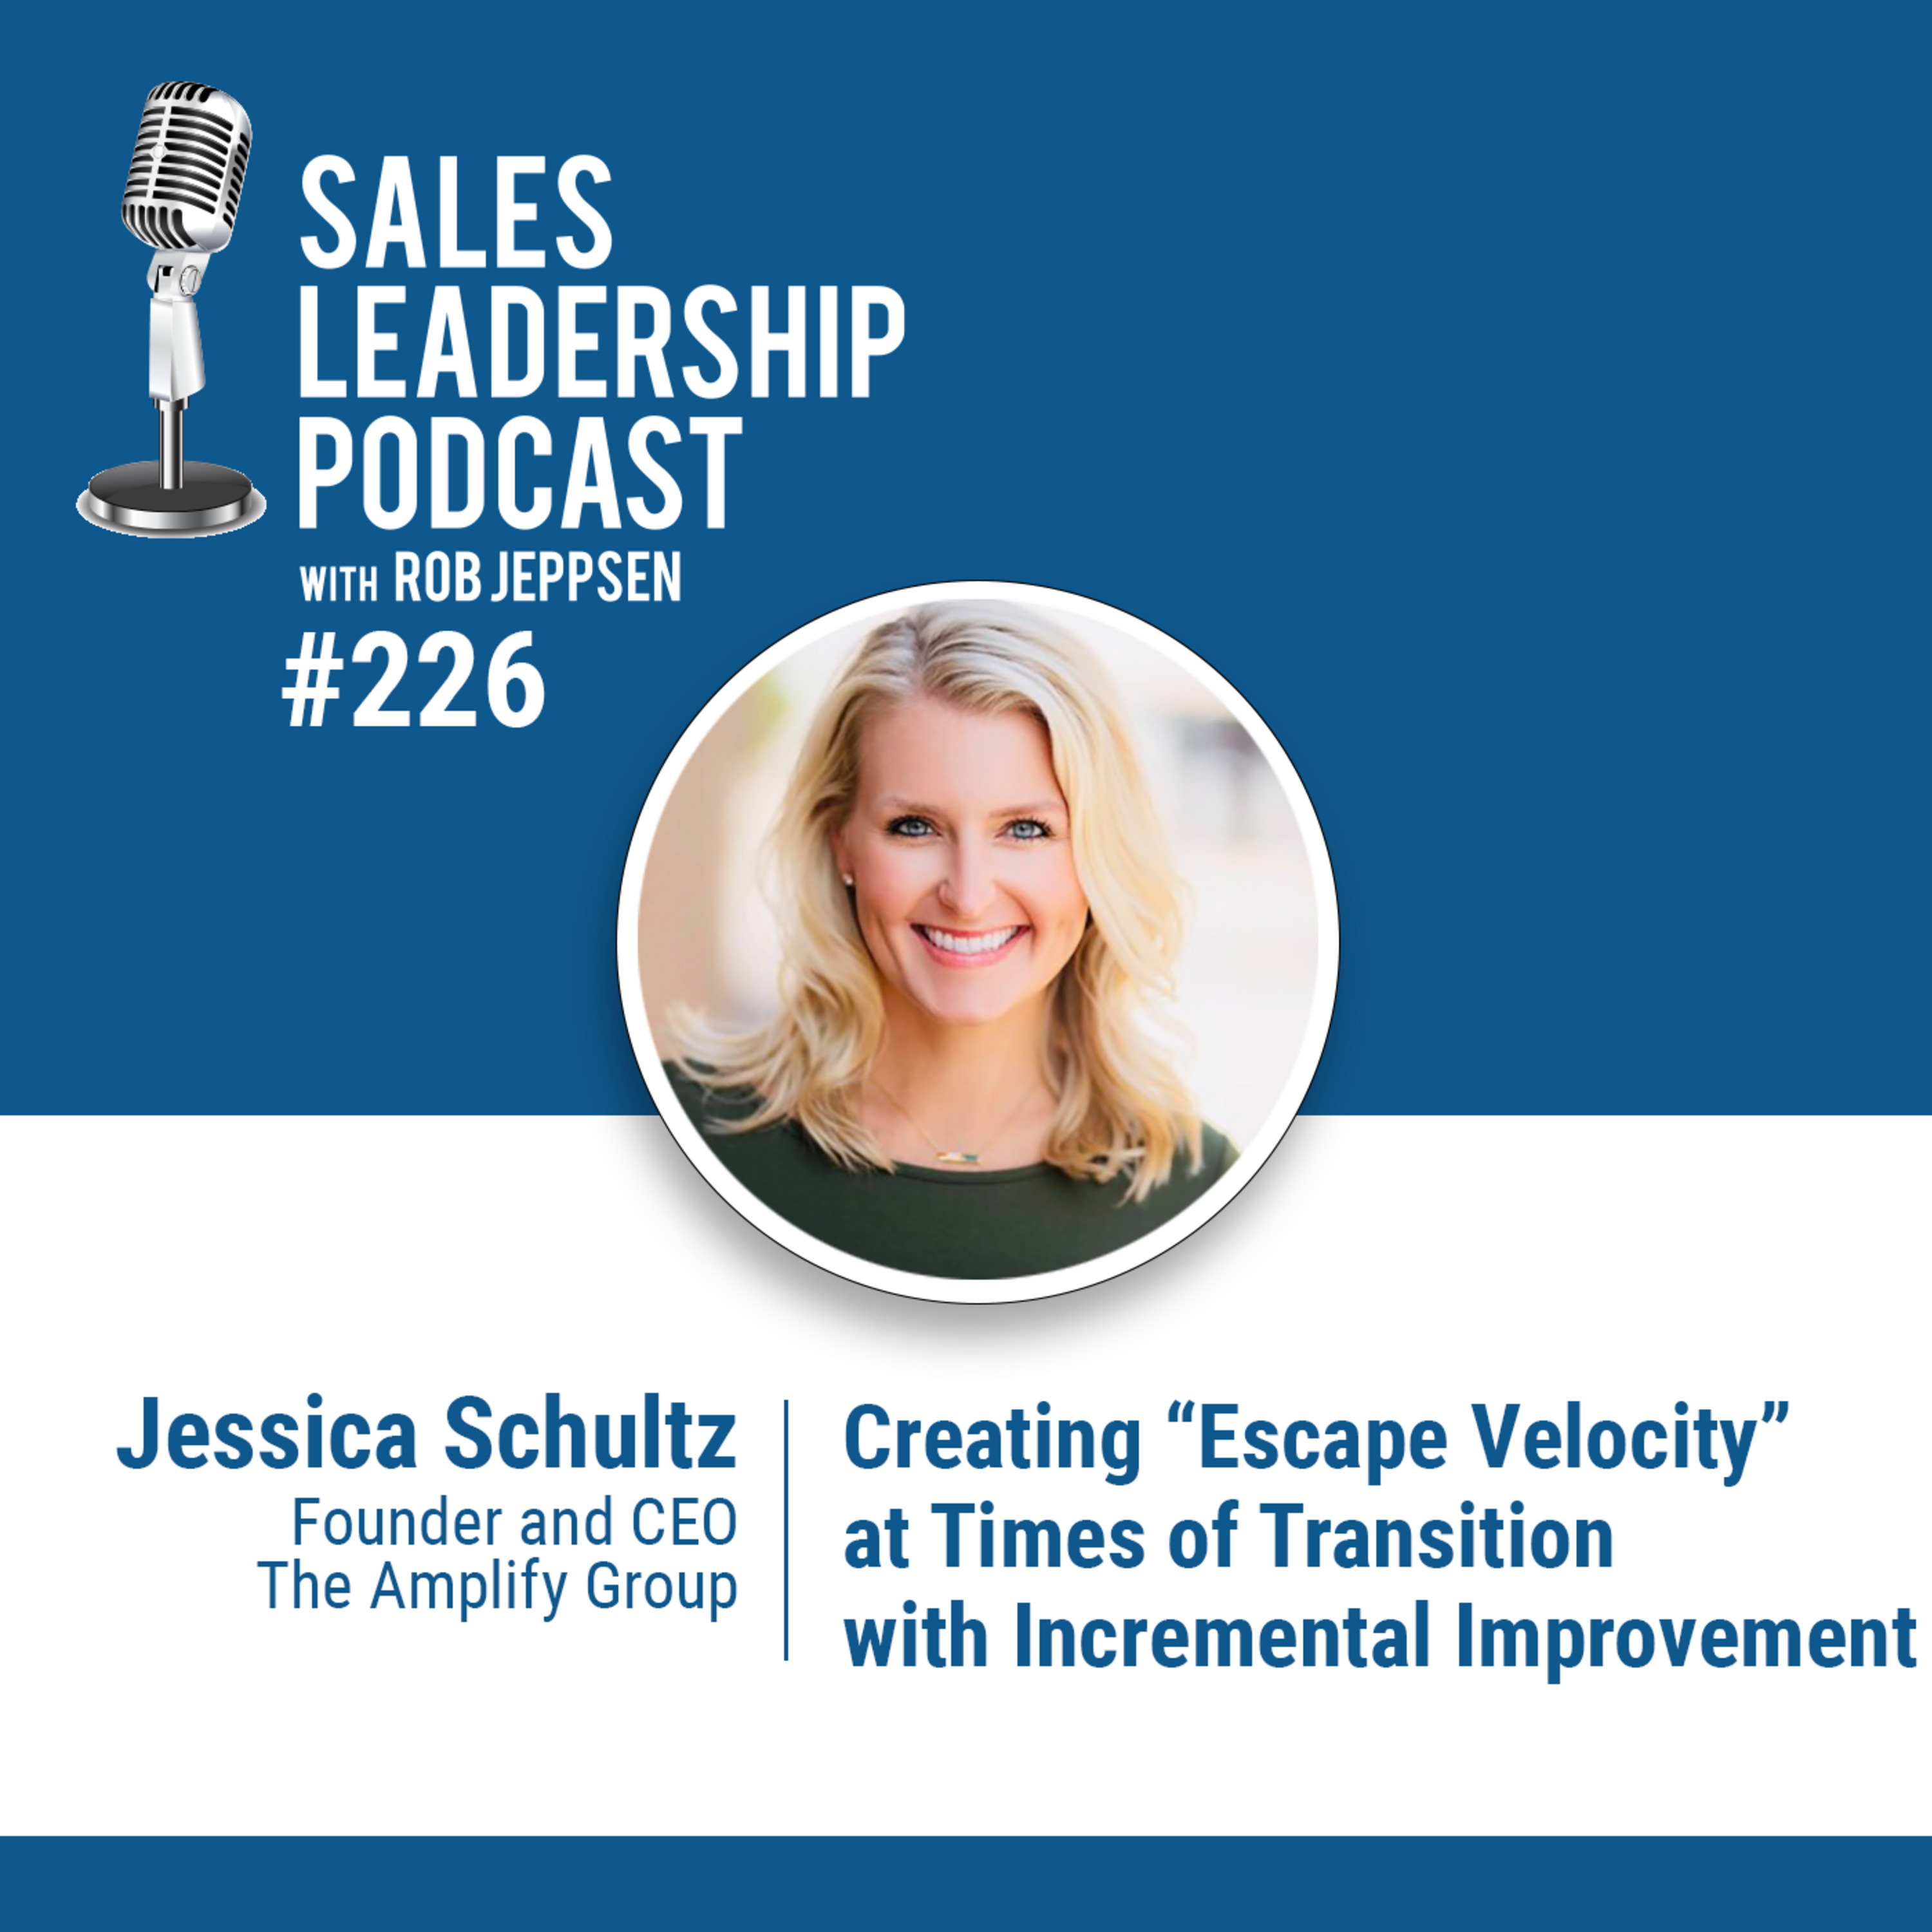 Episode 227: Jessica Schultz, Founder and CEO of The Amplify Group — Creating “Escape Velocity” at Times of Transition with Incremental Improvement